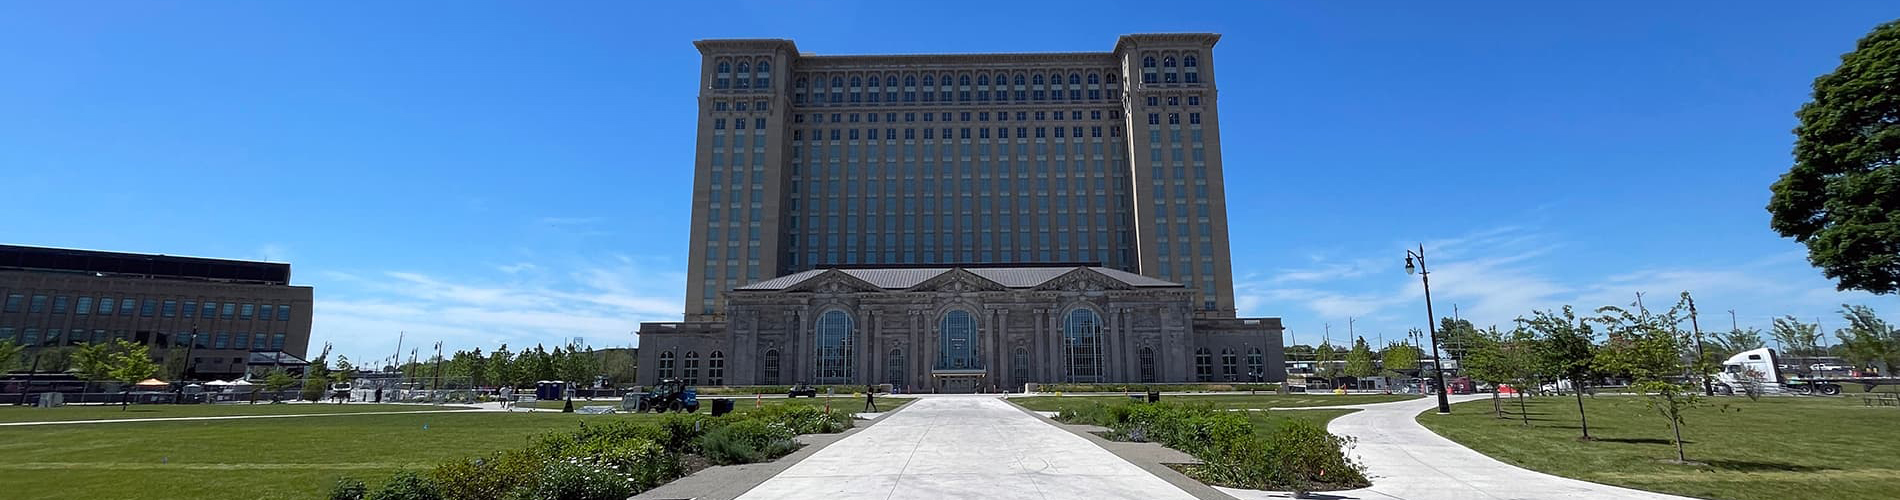 outside front view of Michigan central station